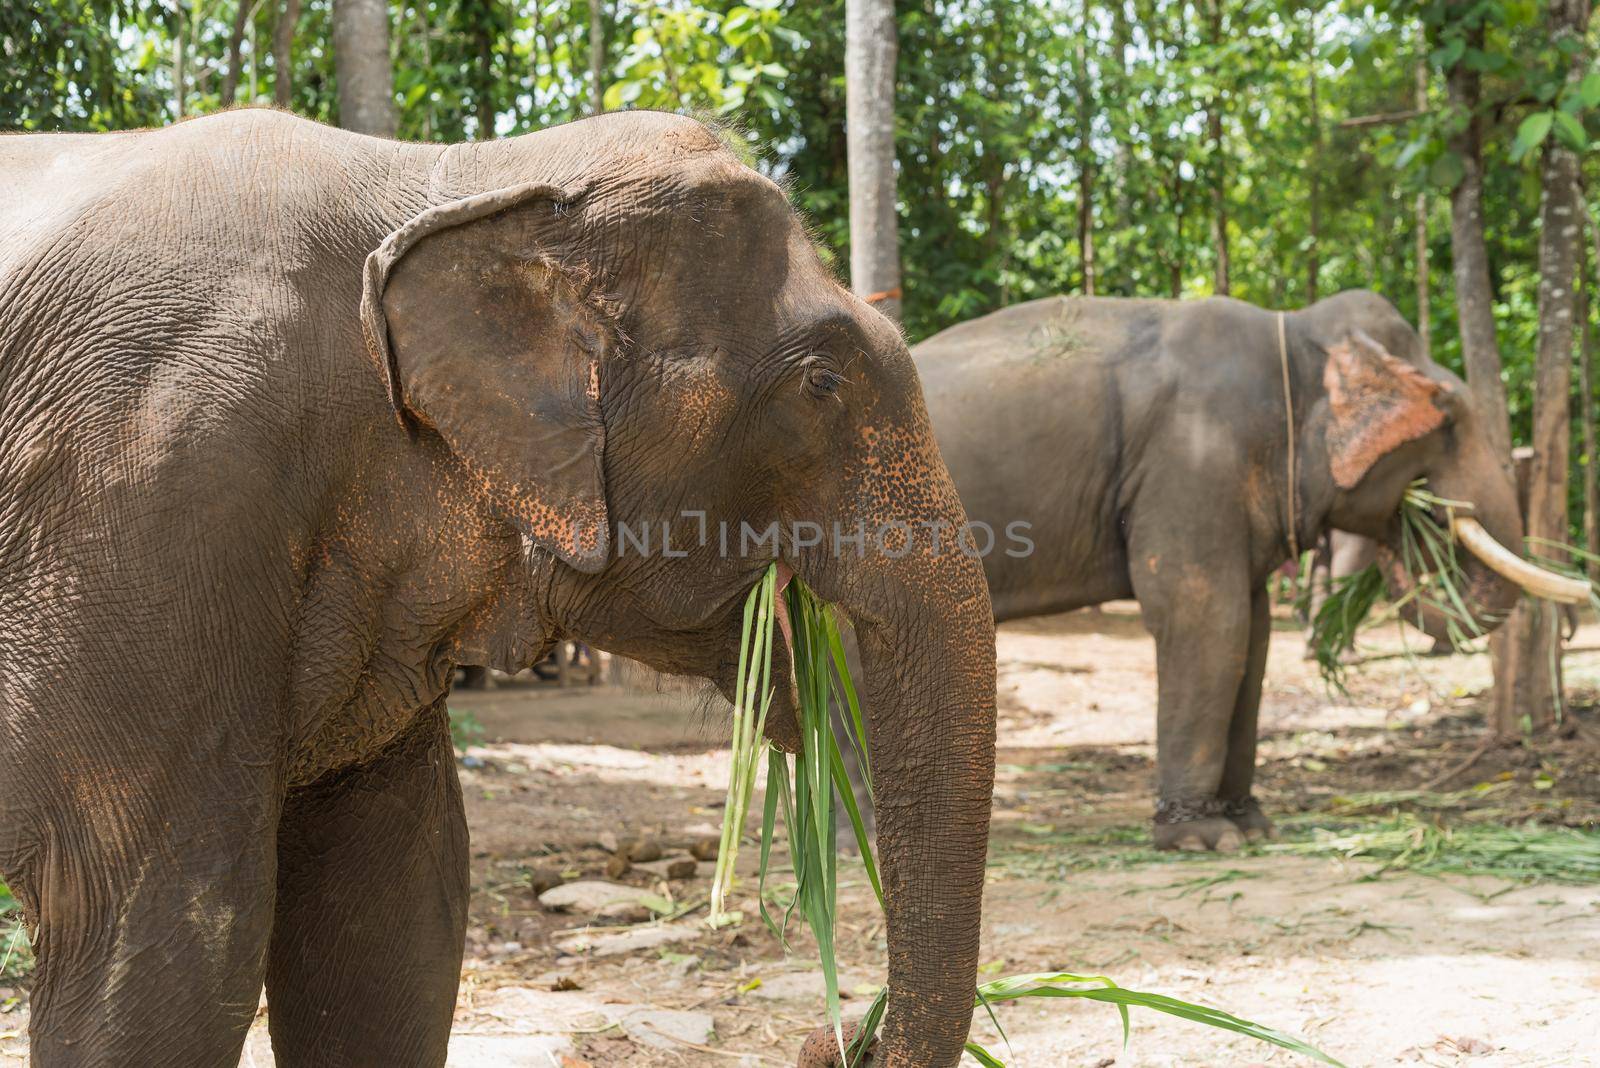 Elephant eat grass at the zoo by Wmpix